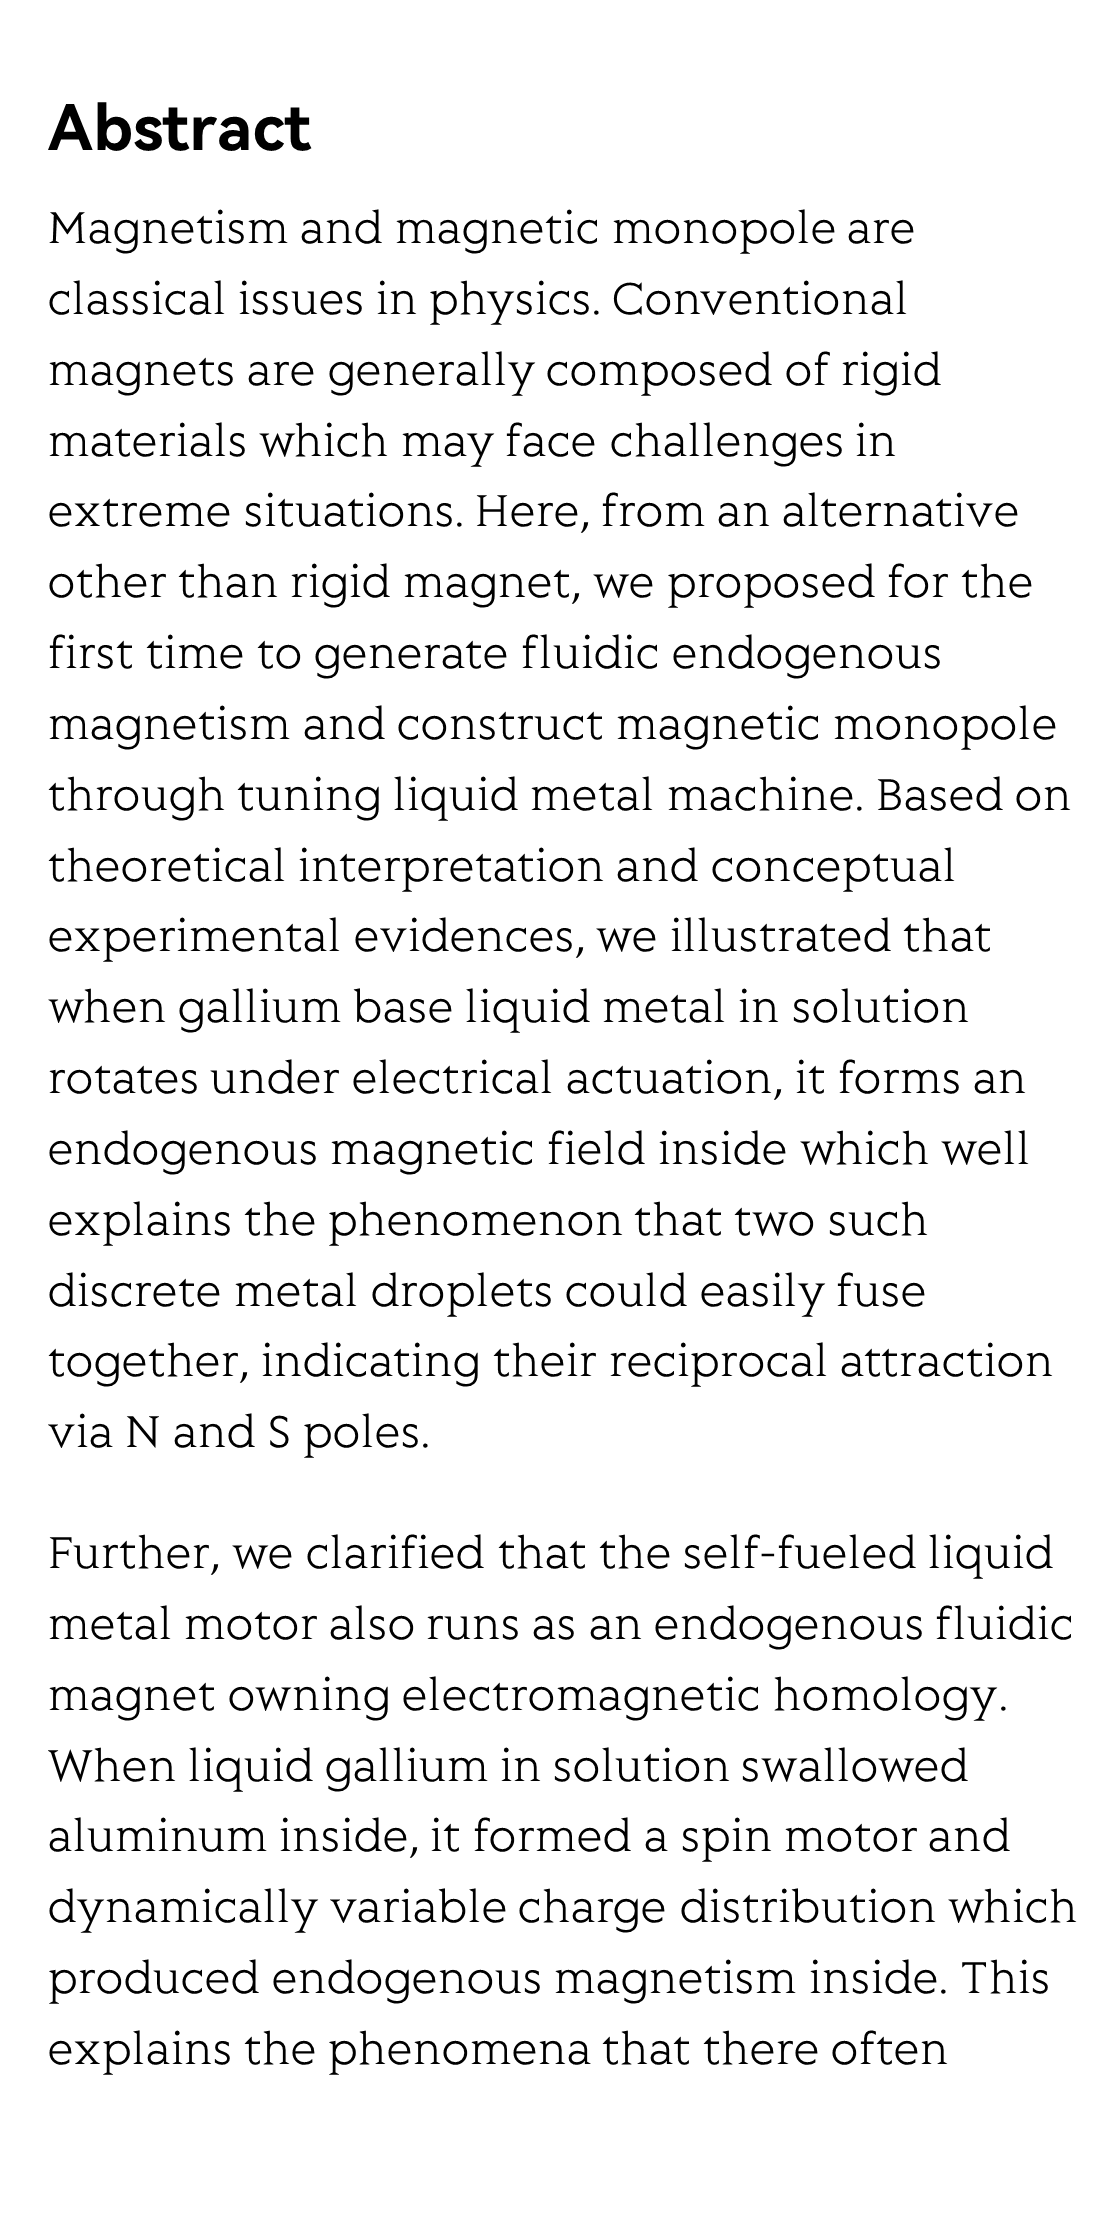 Fluidic Endogenous Magnetism and Magnetic Monopole Clues from Liquid Metal Droplet Machine_2